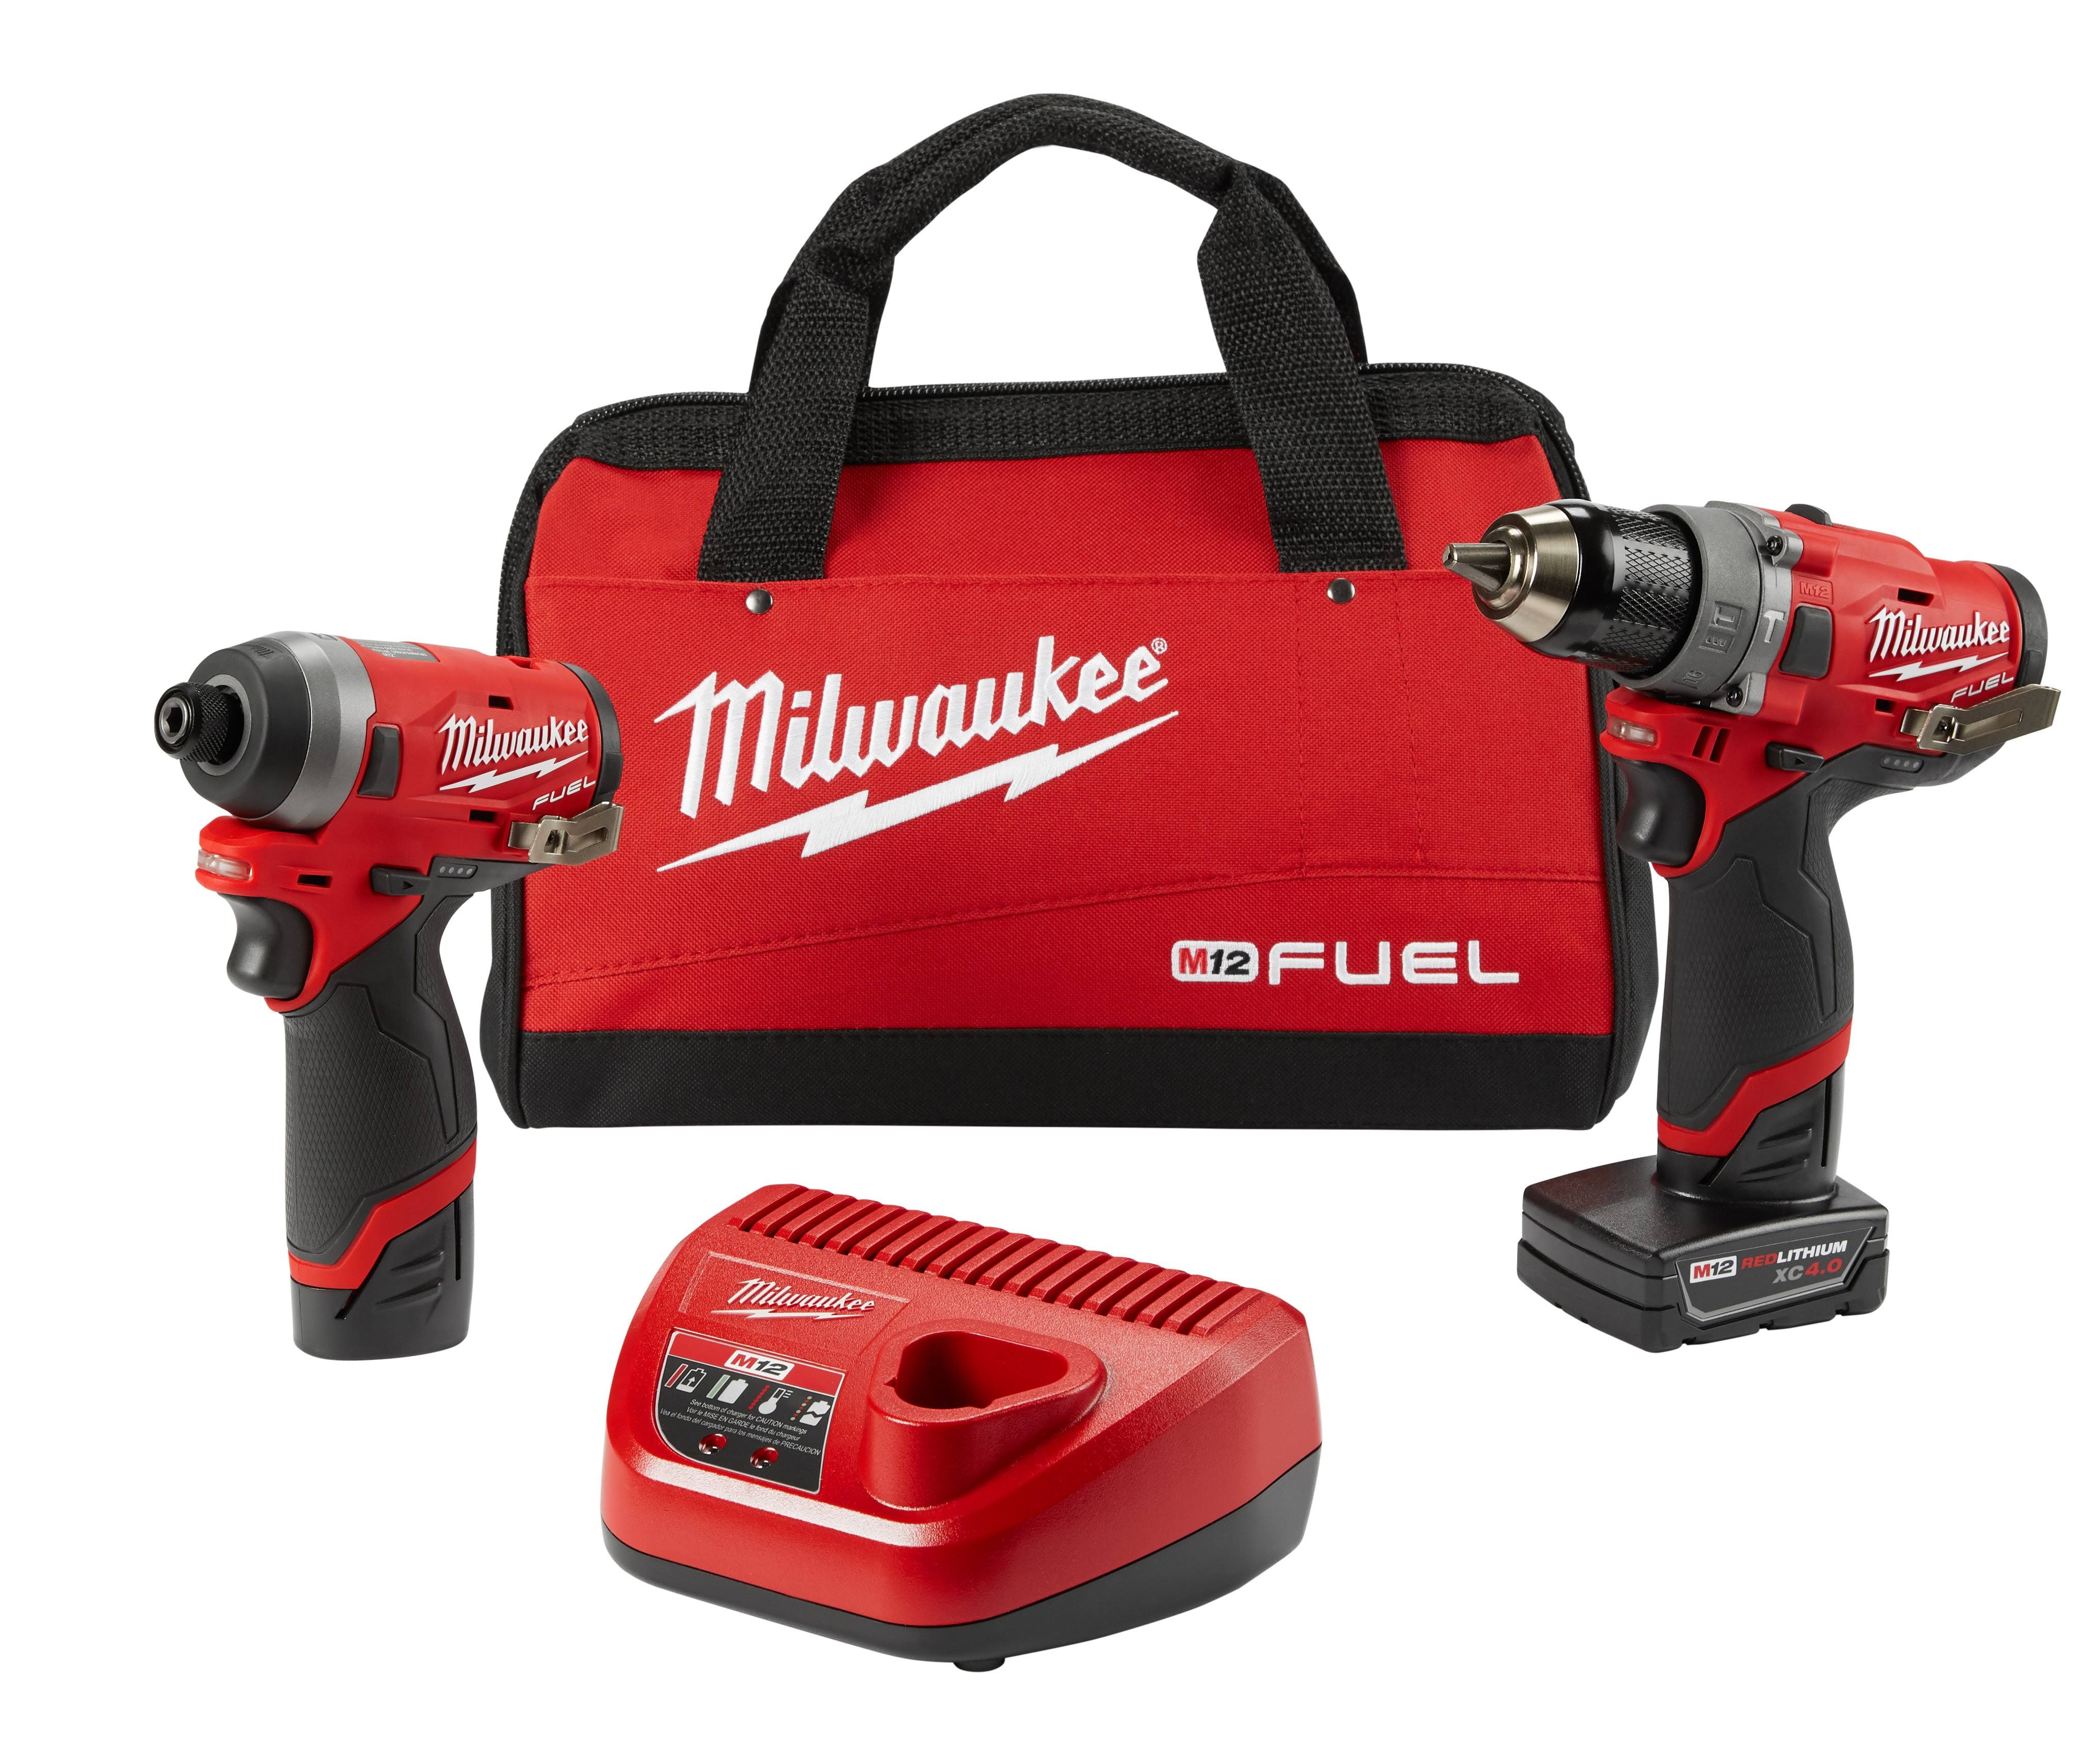 Milwaukee M12 FUEL Lithium-Ion Brushless Cordless Hammer Drill and Impact Driver Combo Kit - 12v, 2pcs, with Batteries and Bag